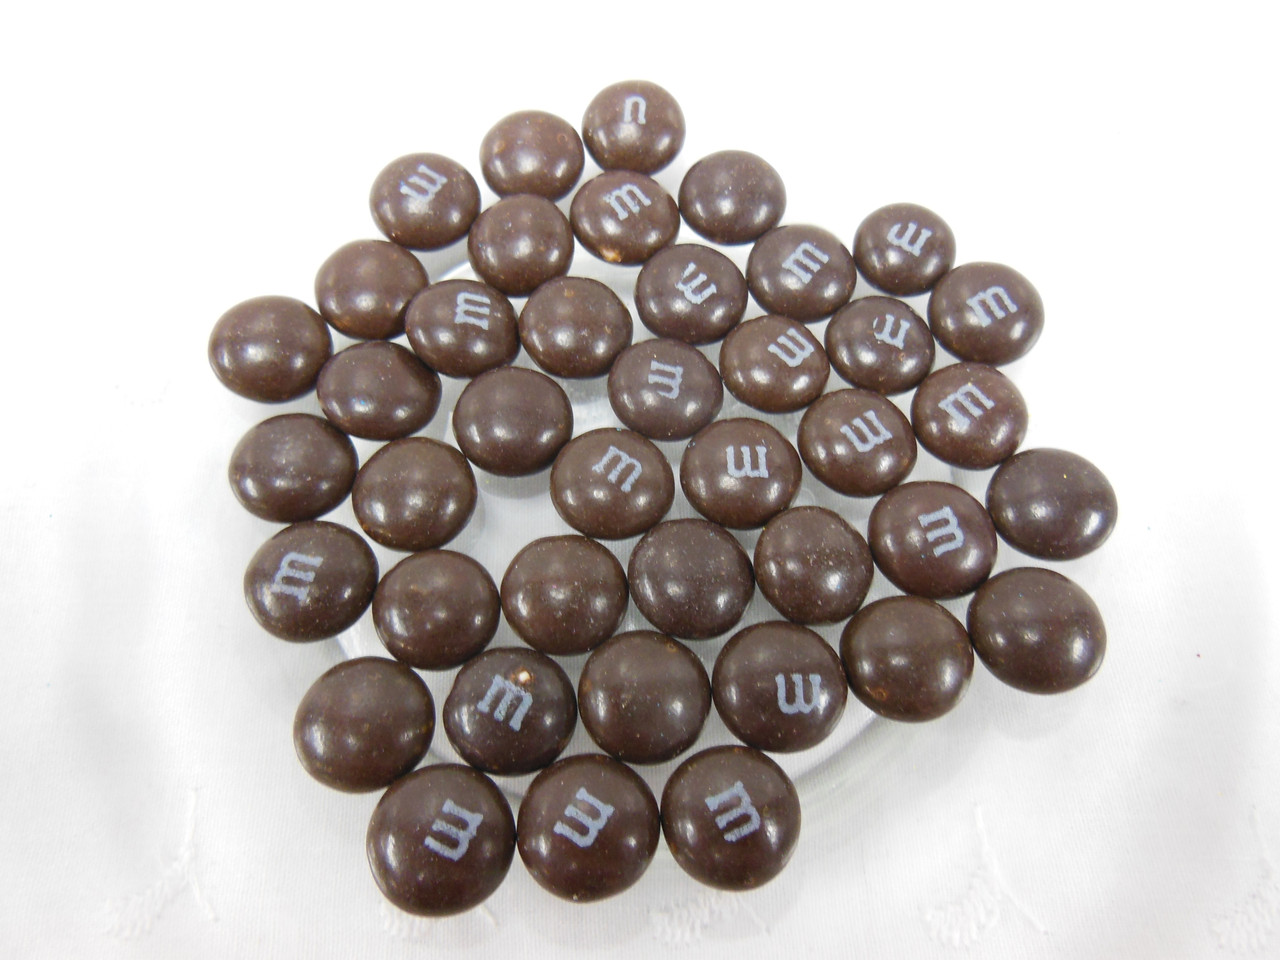 M & M Chocolate Candies, Mint Made with Dark Chocolate, Packaged Candy